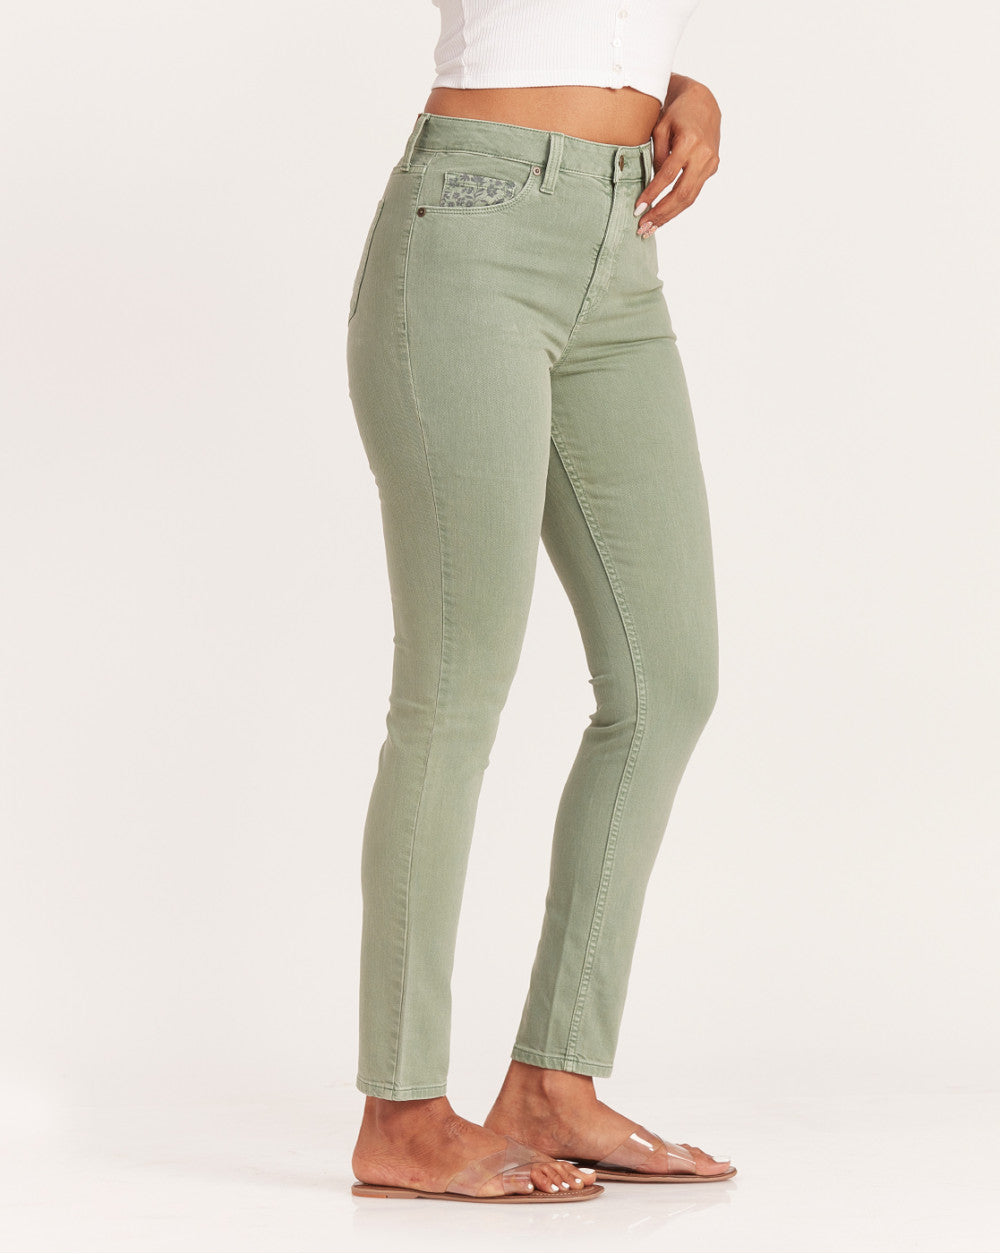 Skinny Fit High Waist Colored Jeans - Washed Jade